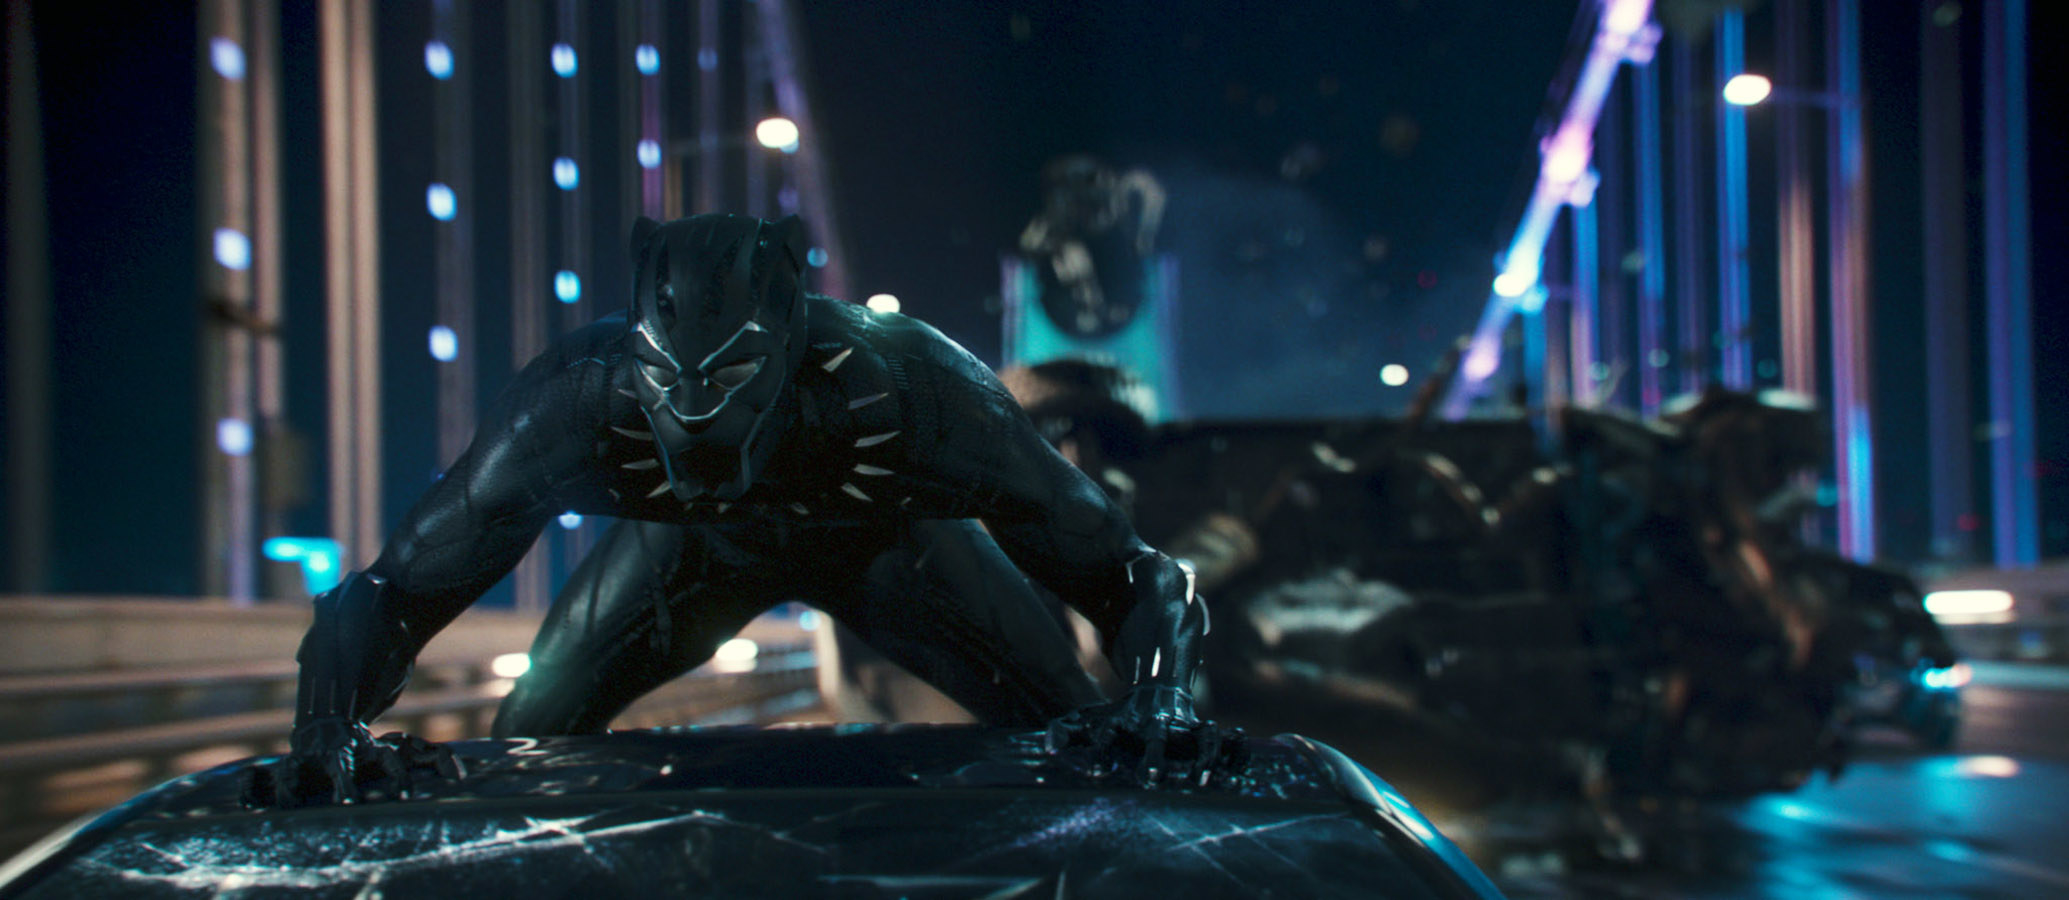 Chadwick Boseman as Black Panther on top of a moving vehicle